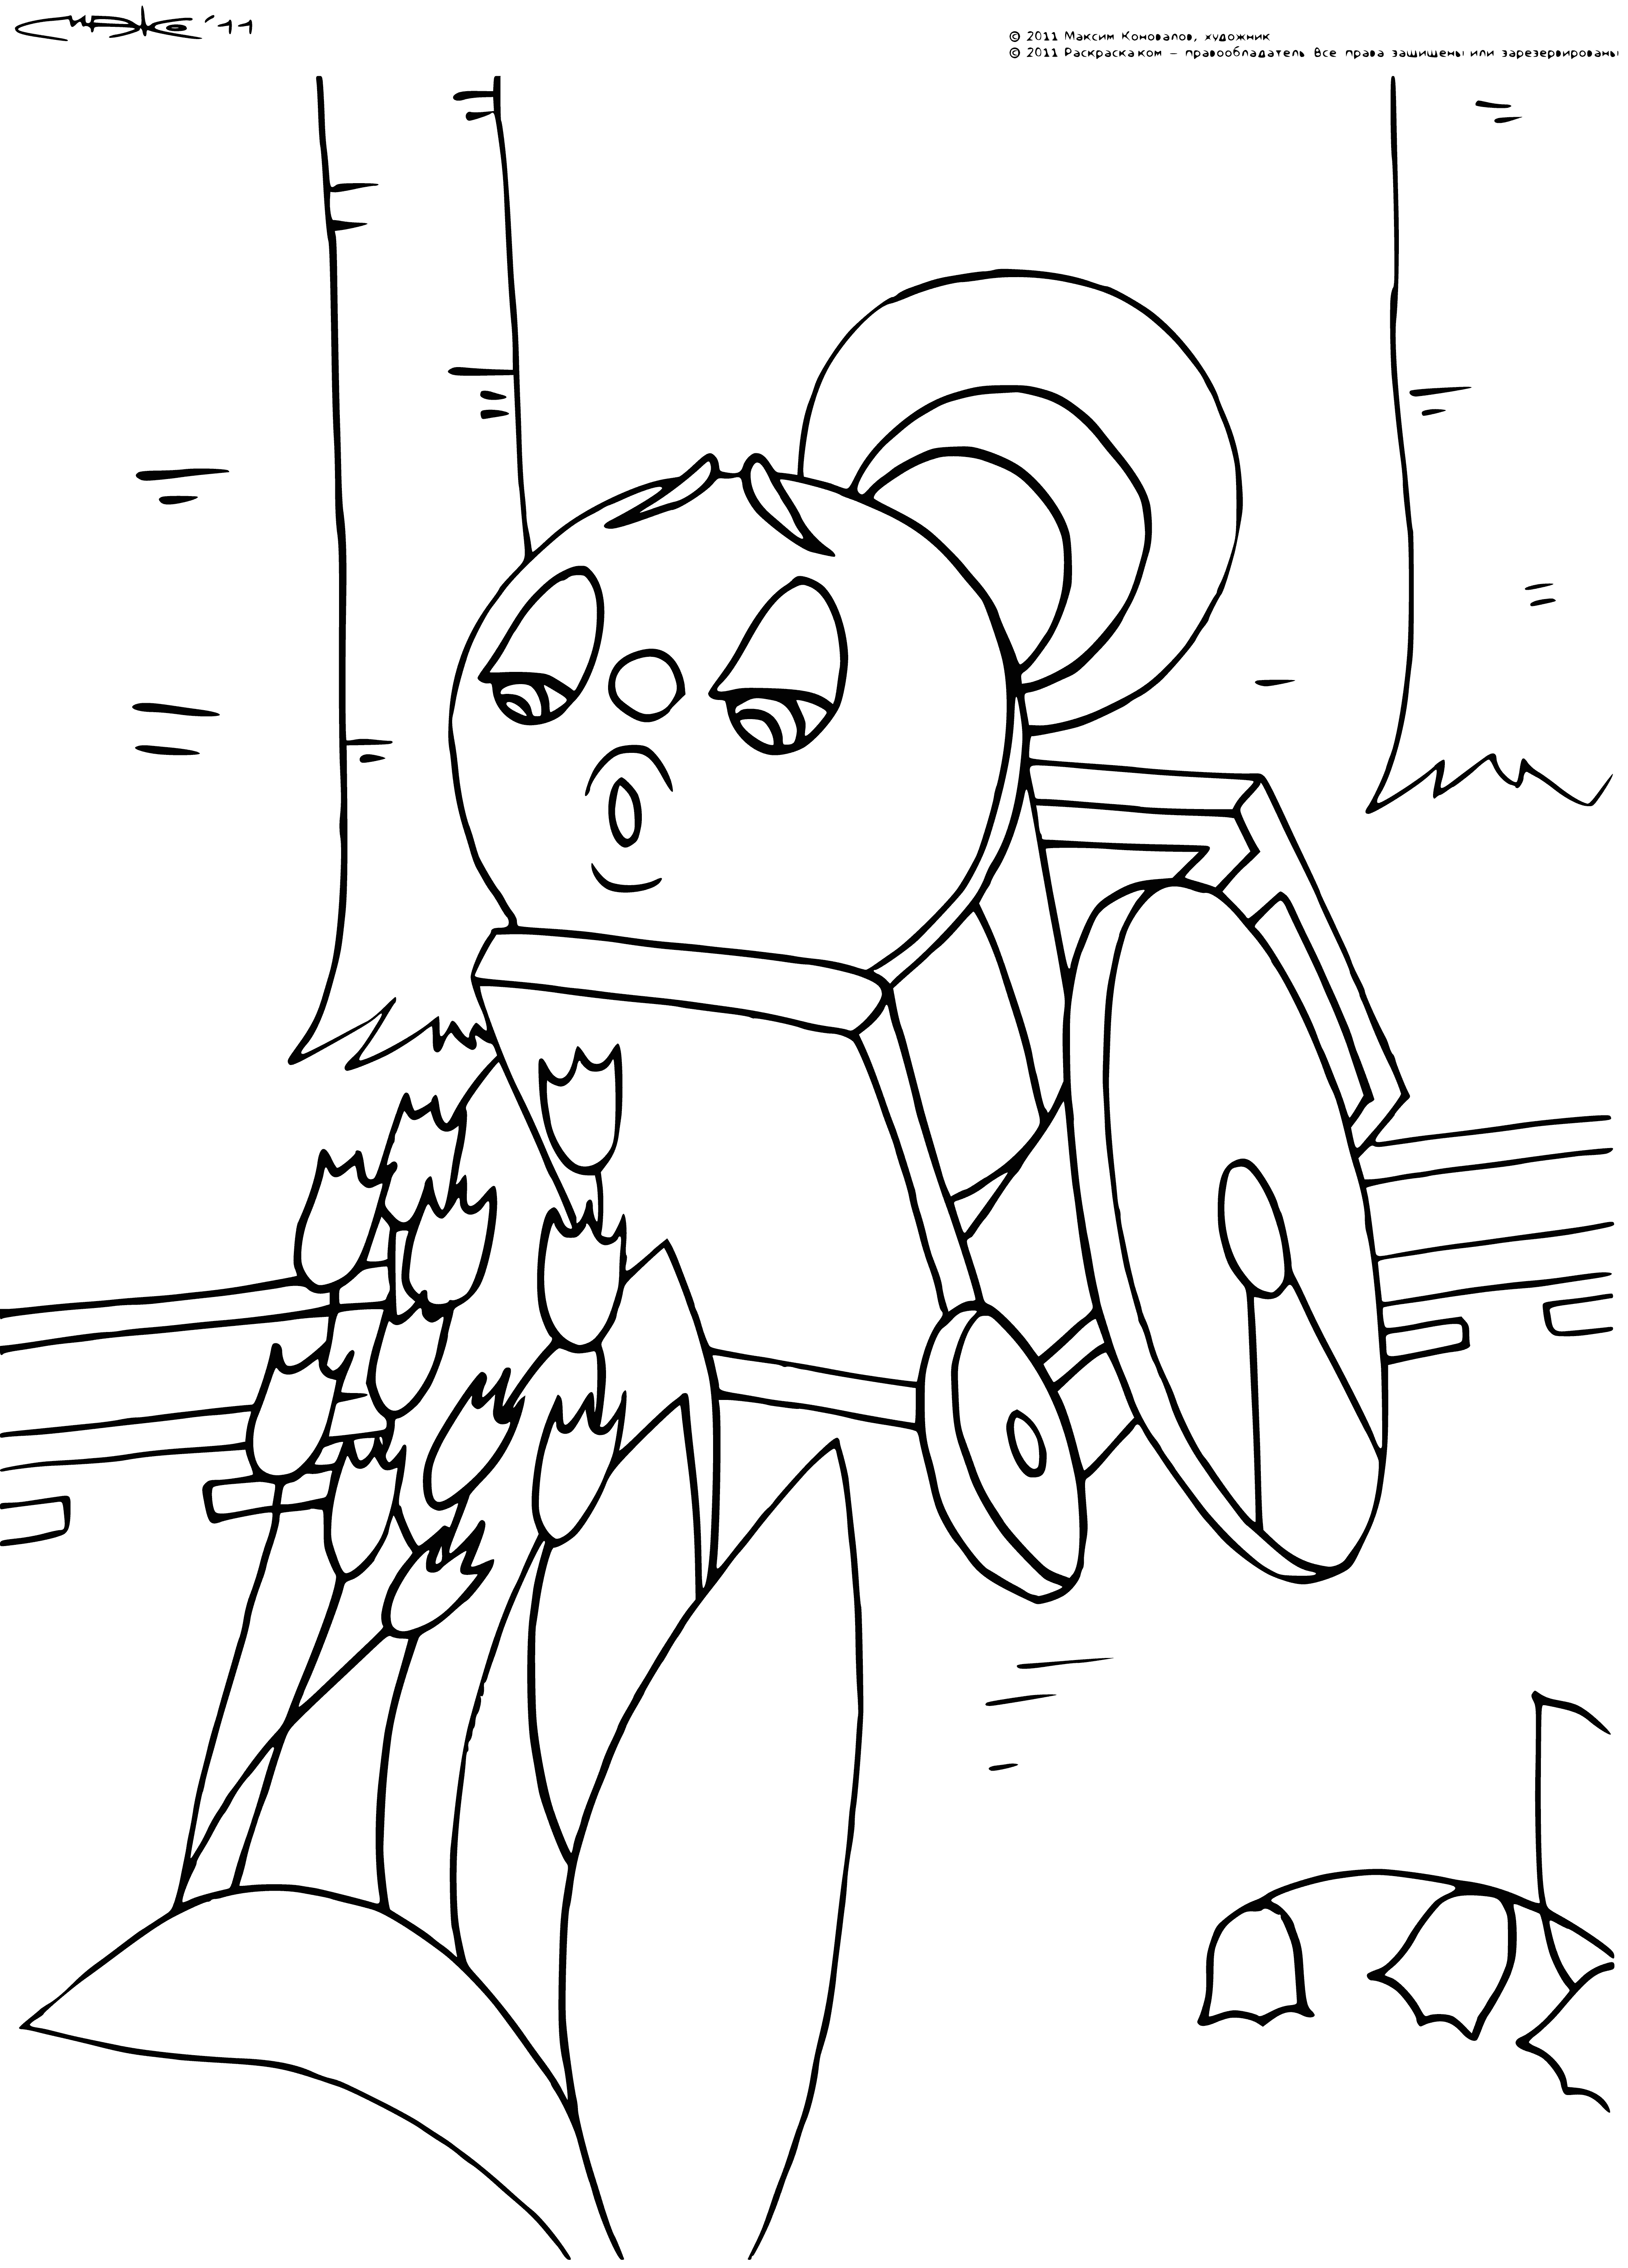 coloring page: Romashkovo locomotive takes in the sweet smell of flowers in a coloring page. #locomotives #flowers #coloringpages